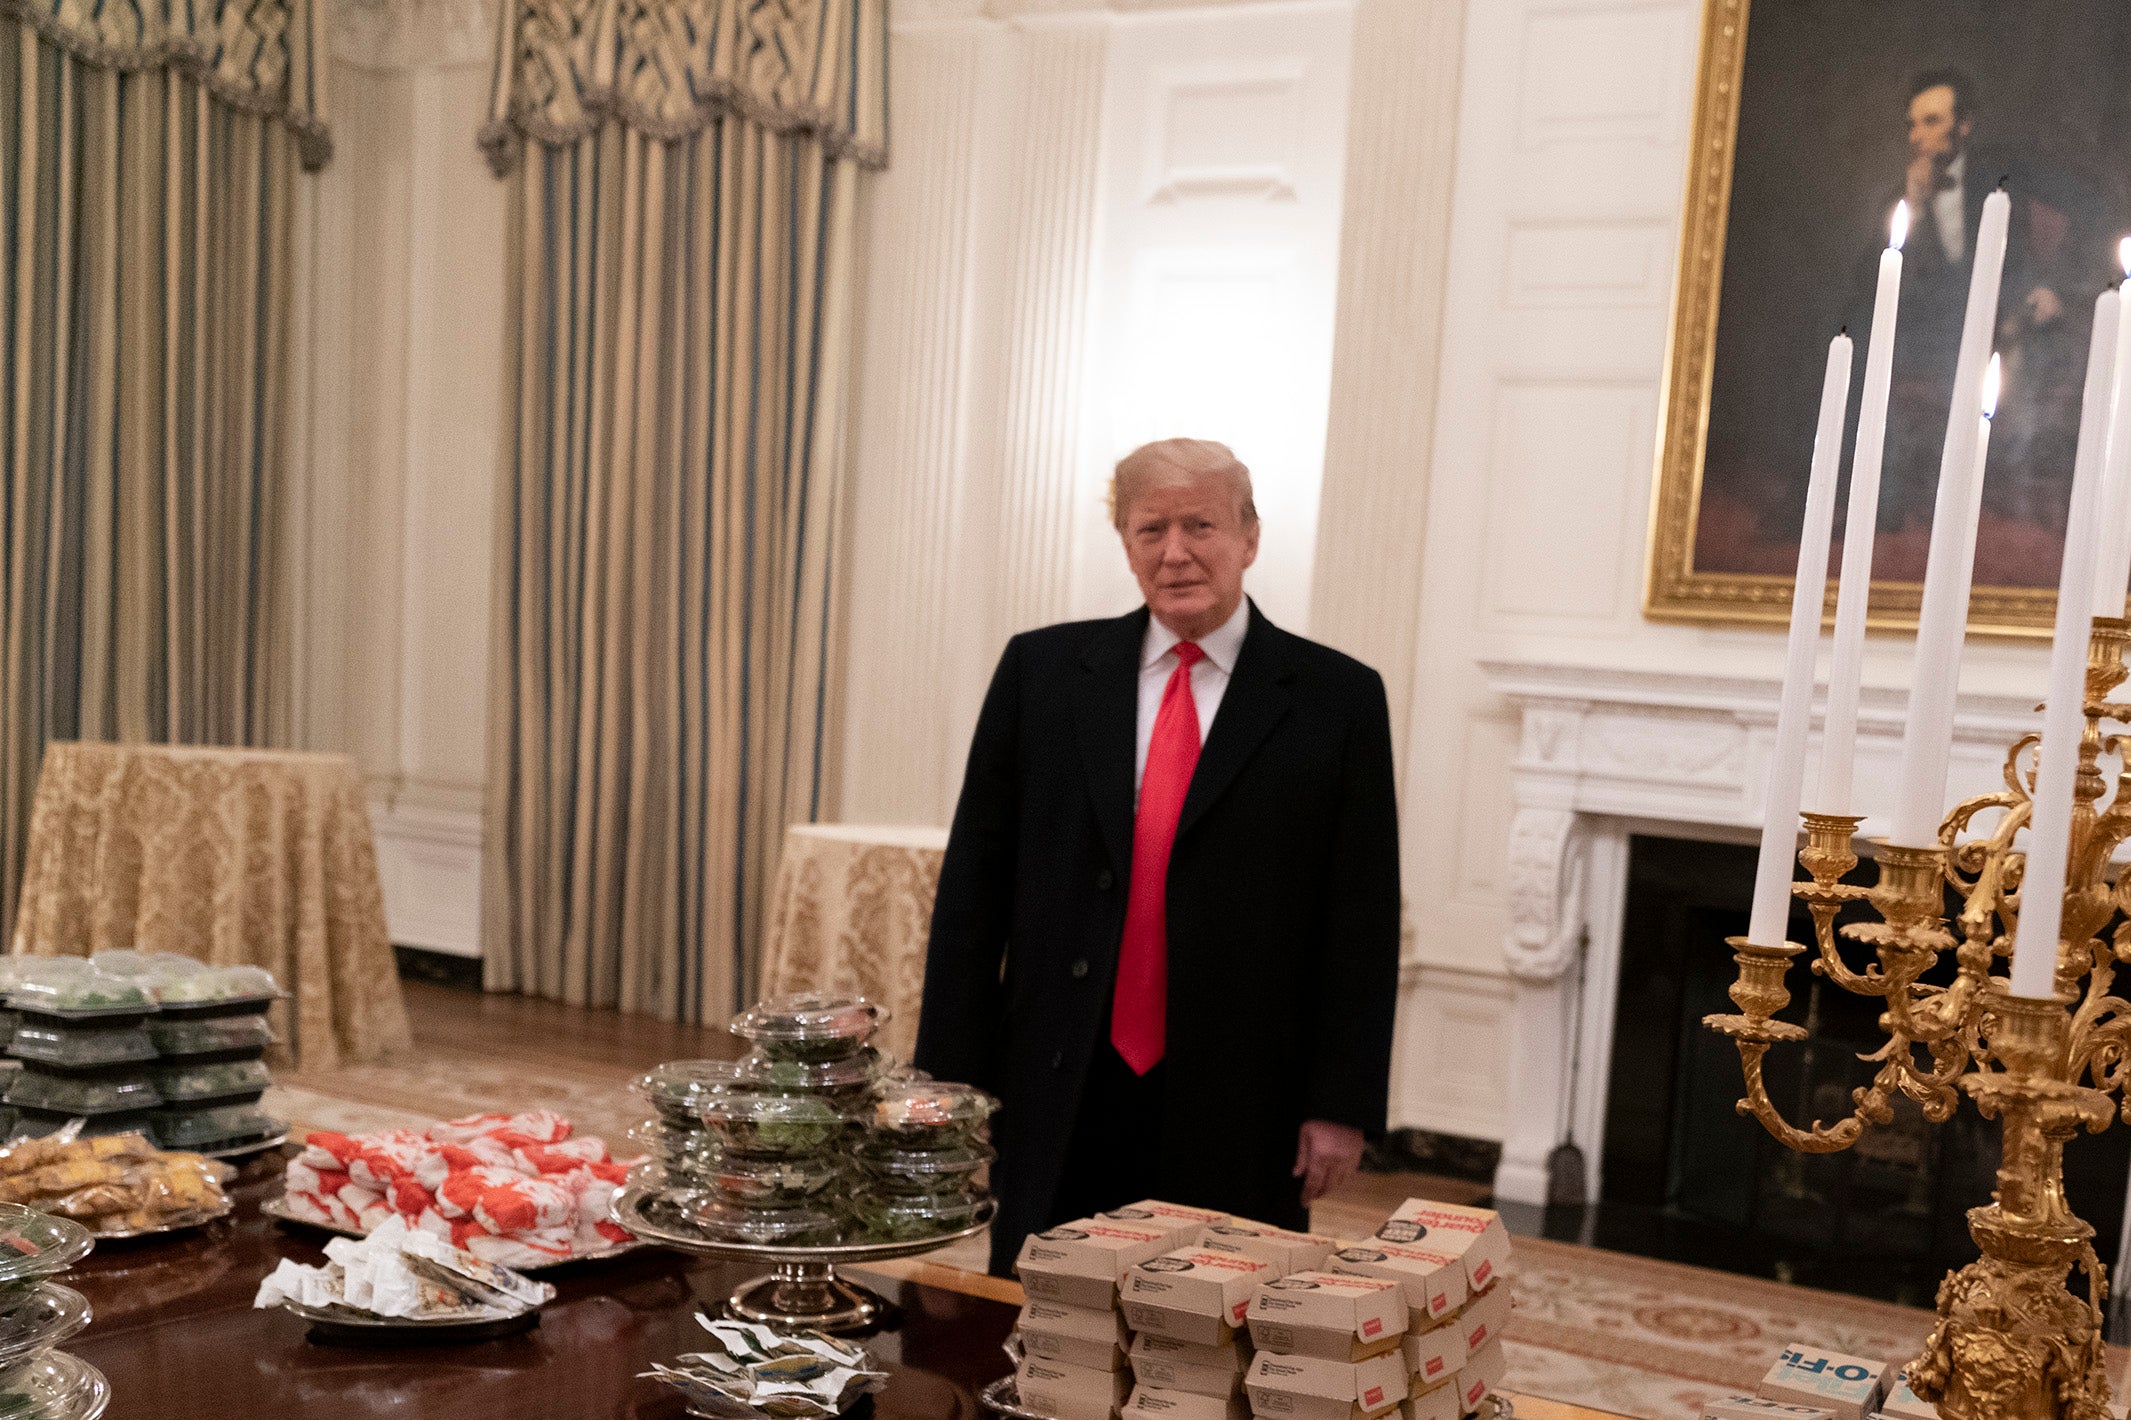 Trump stands in front of a table covered in fast food with a portrait of Abraham Lincoln behind him.